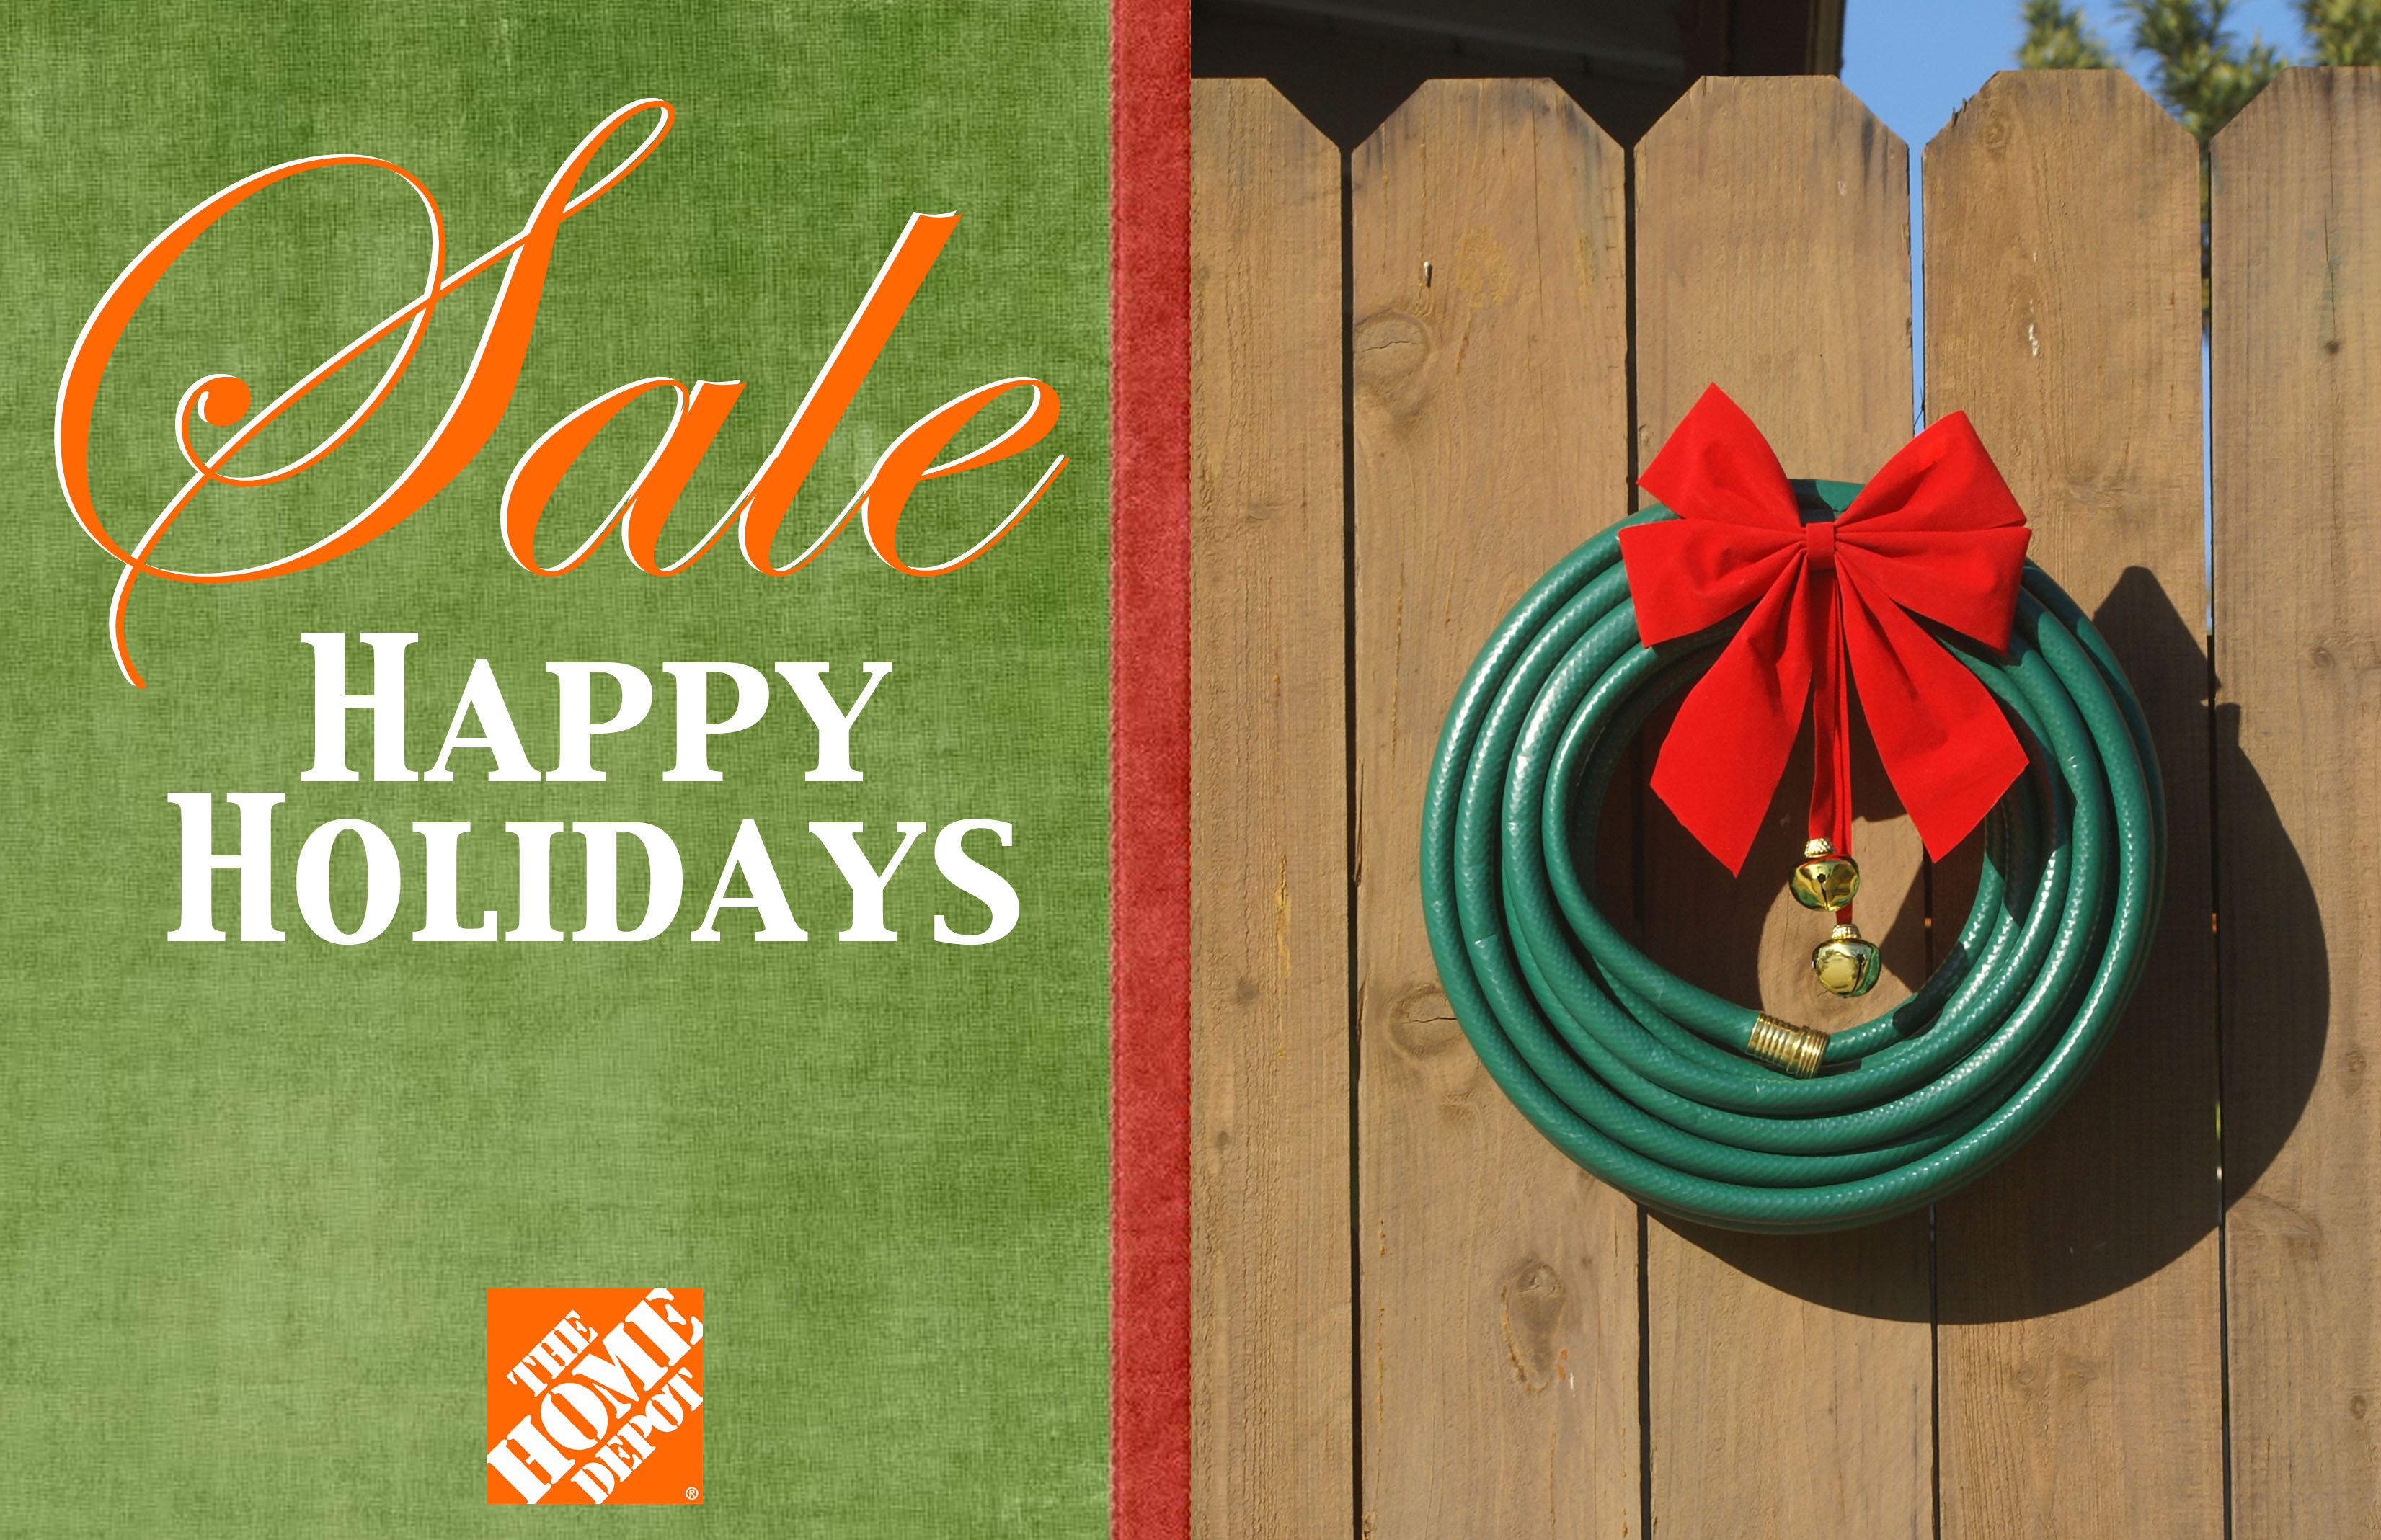 Happy Holidays from Home Depot – Carie's Thoughts on…